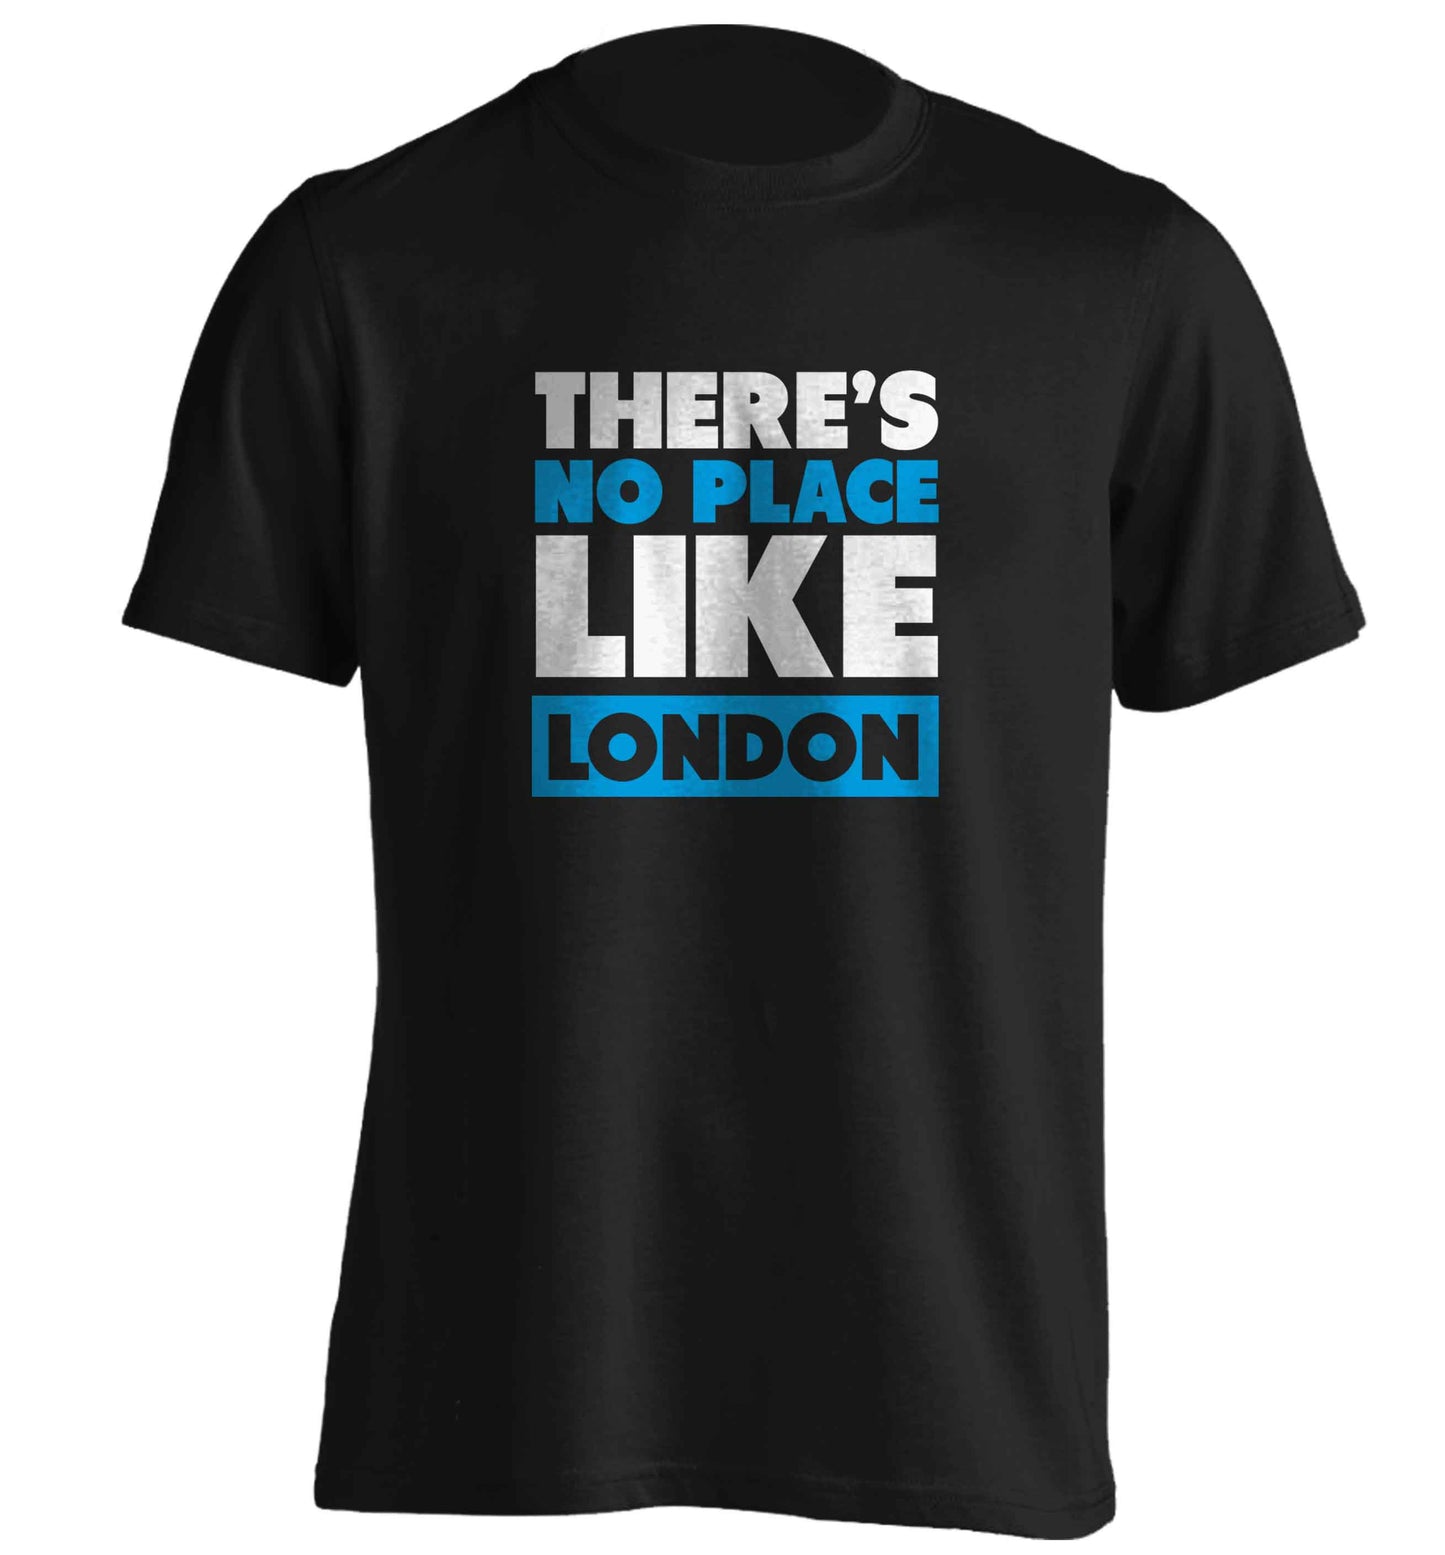 There's no place like England adults unisex black Tshirt 2XL